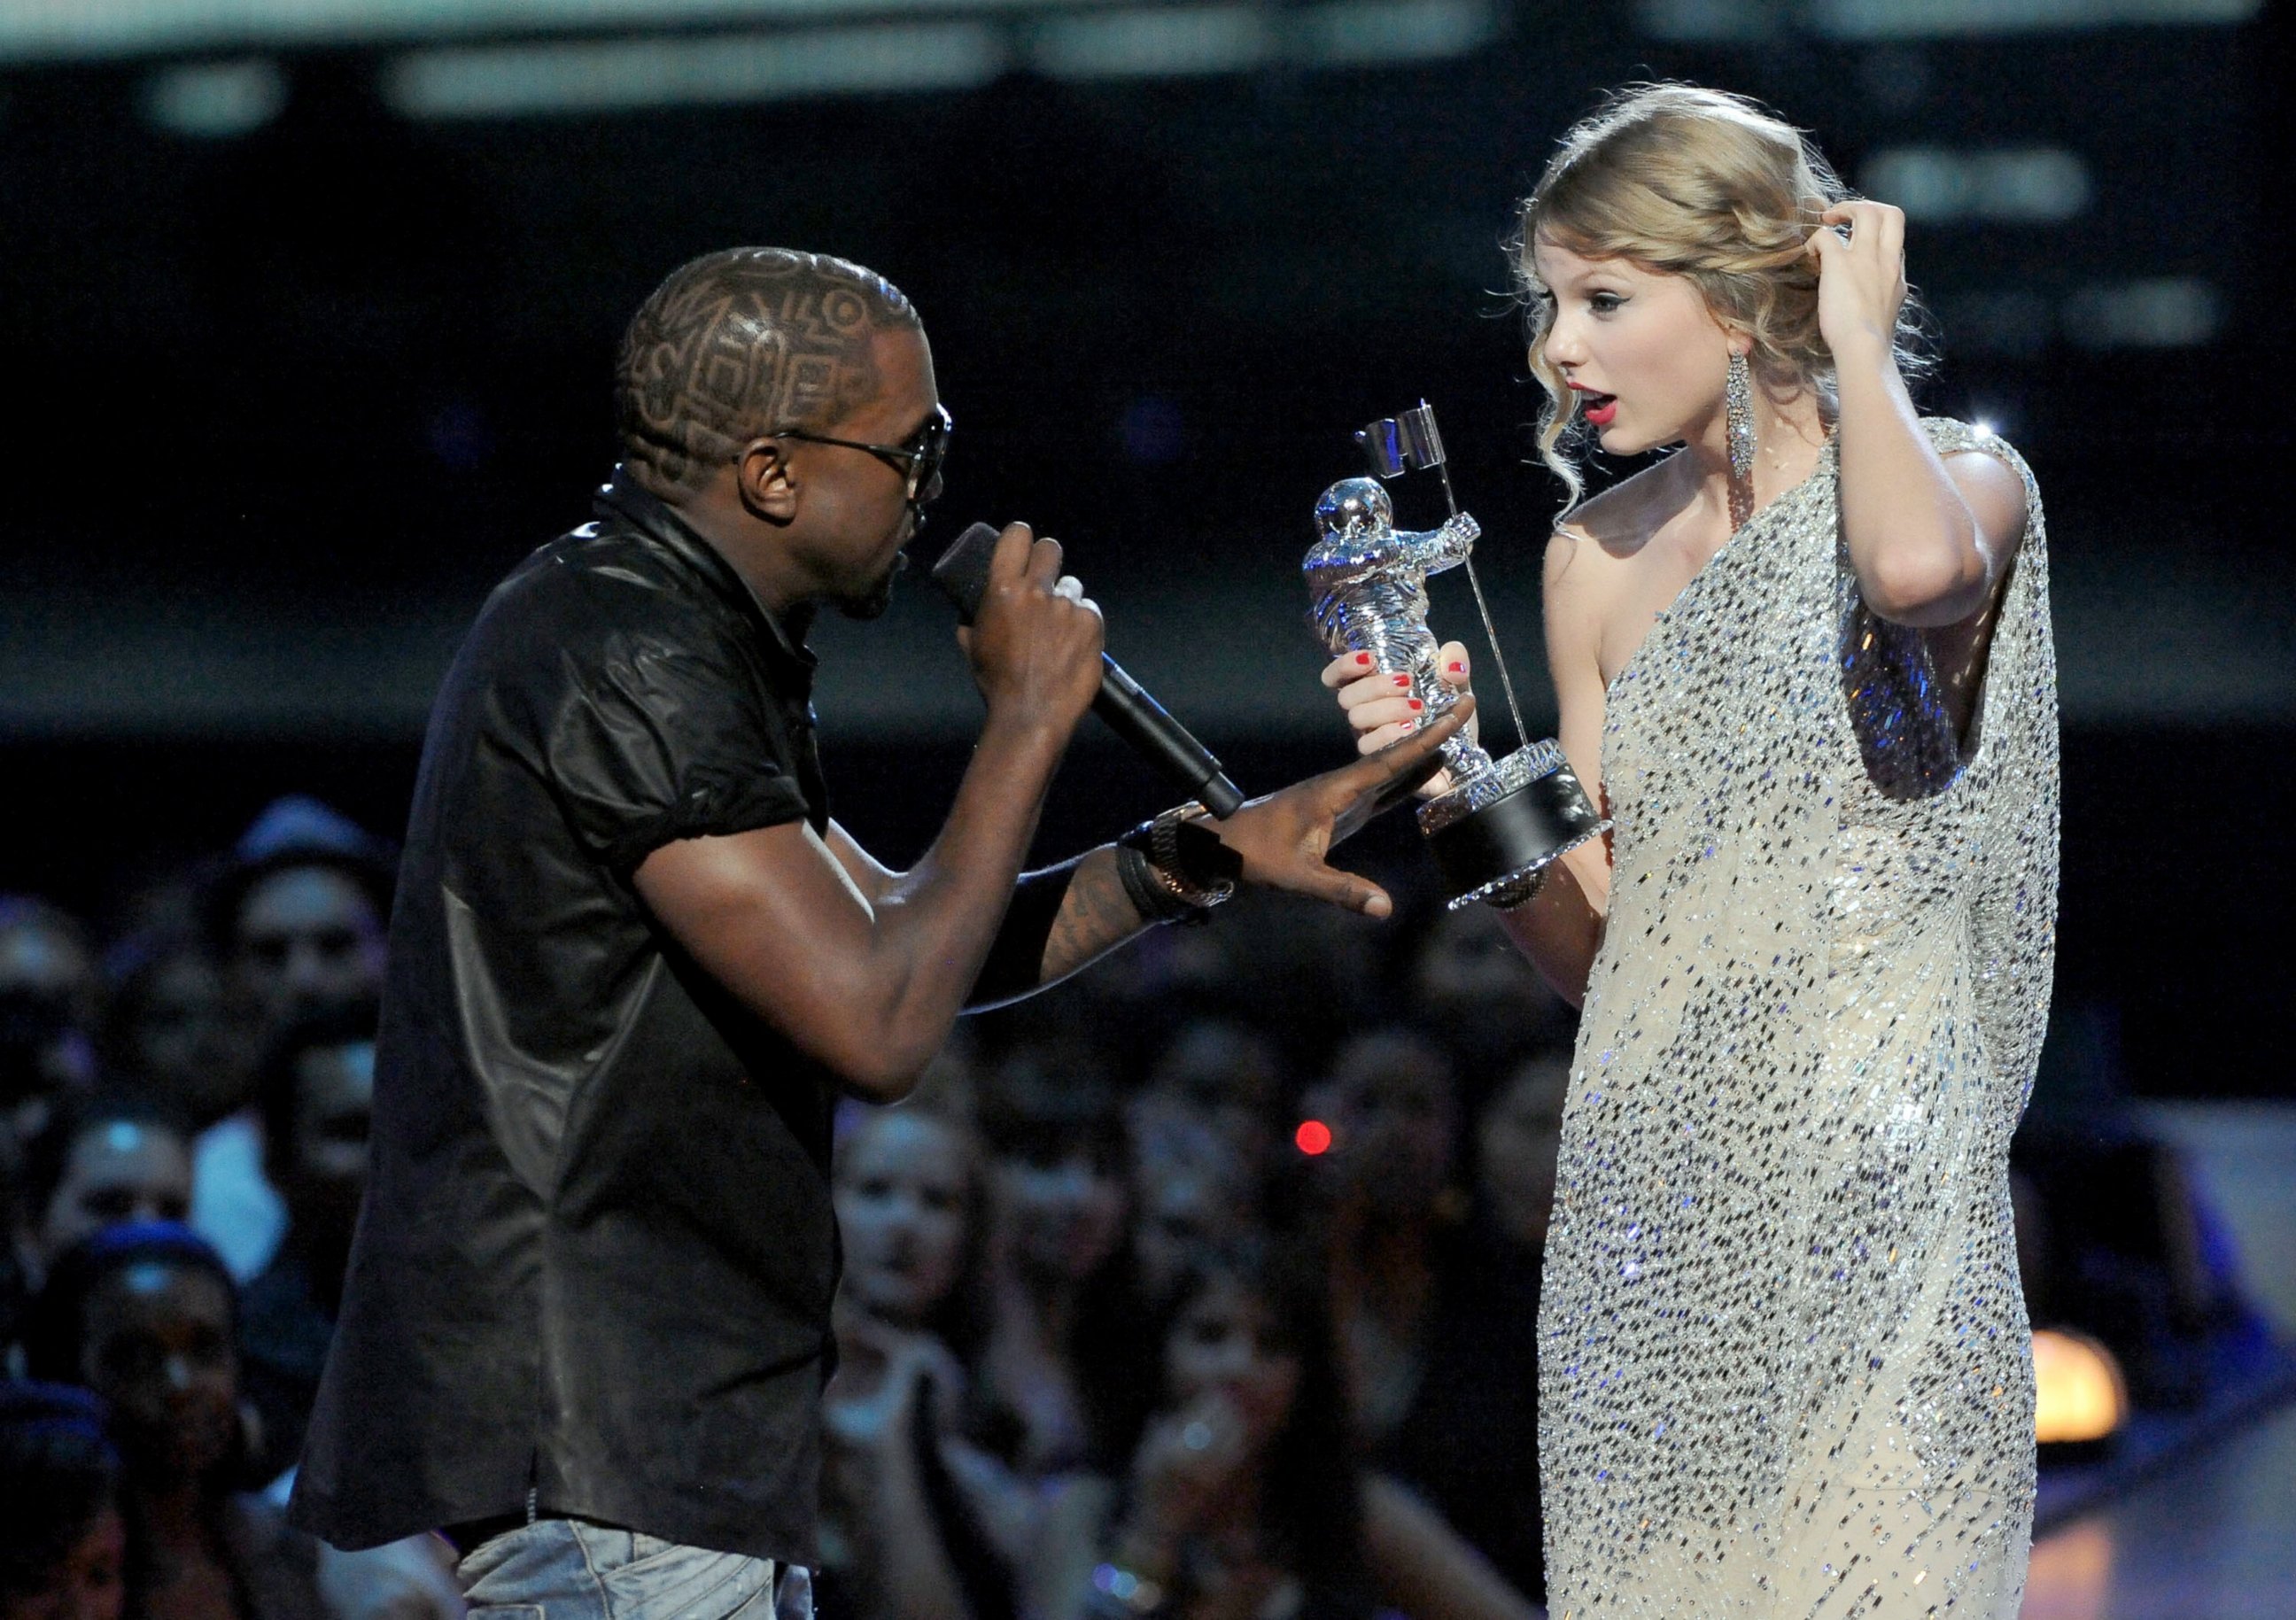 PHOTO: Kayne West jumps onstage as Taylor Swift accepts her award for the "Best Female Video" award during the 2009 MTV Video Music Awards at Radio City Music Hall, Sept. 13, 2009, in New York City.